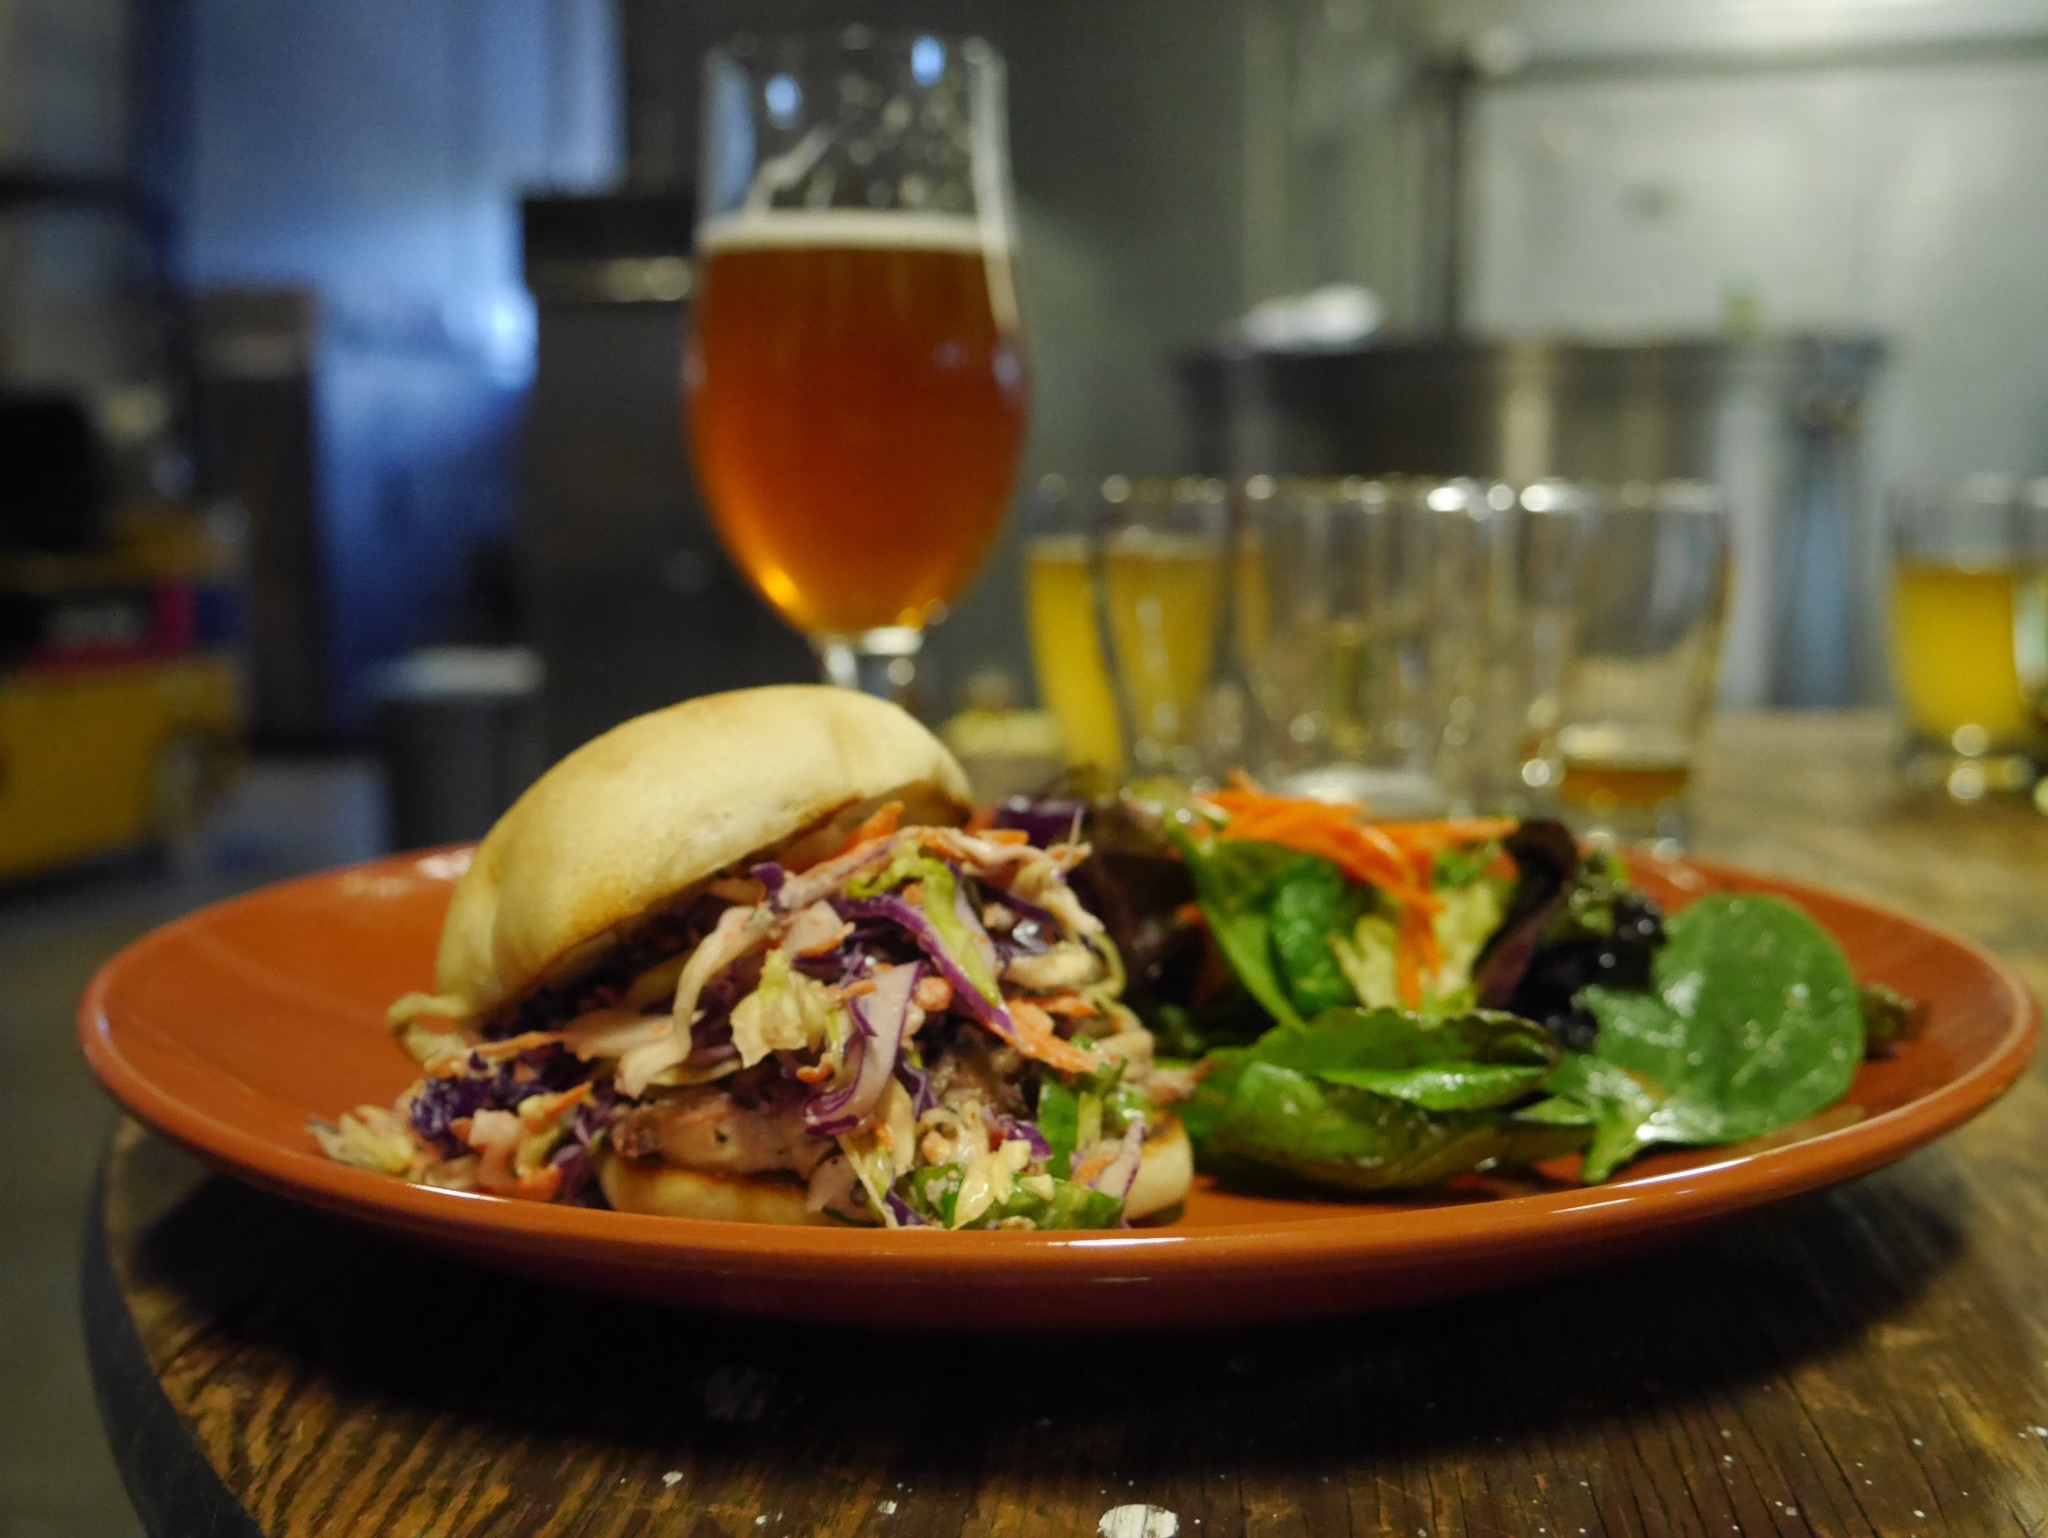 Culmination Brewing's food from Carter B. Owen (photo by Cat Stelzer)